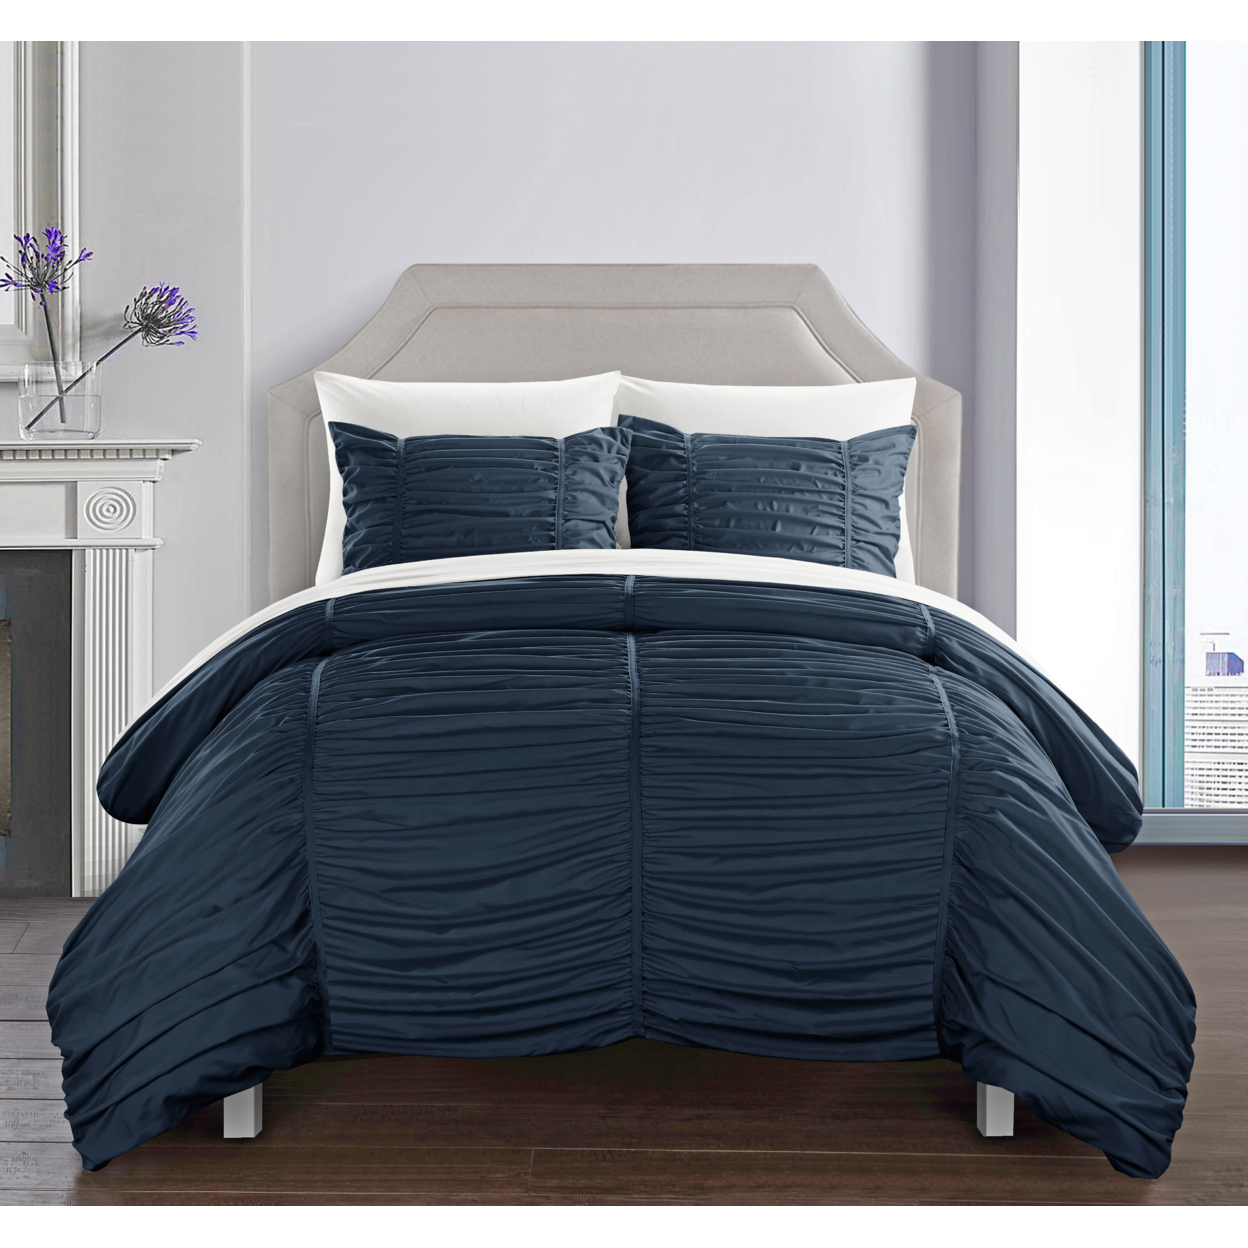 Kiela 2 Pc Or 3 Pc Ruched Comforter Set - Navy, Twin